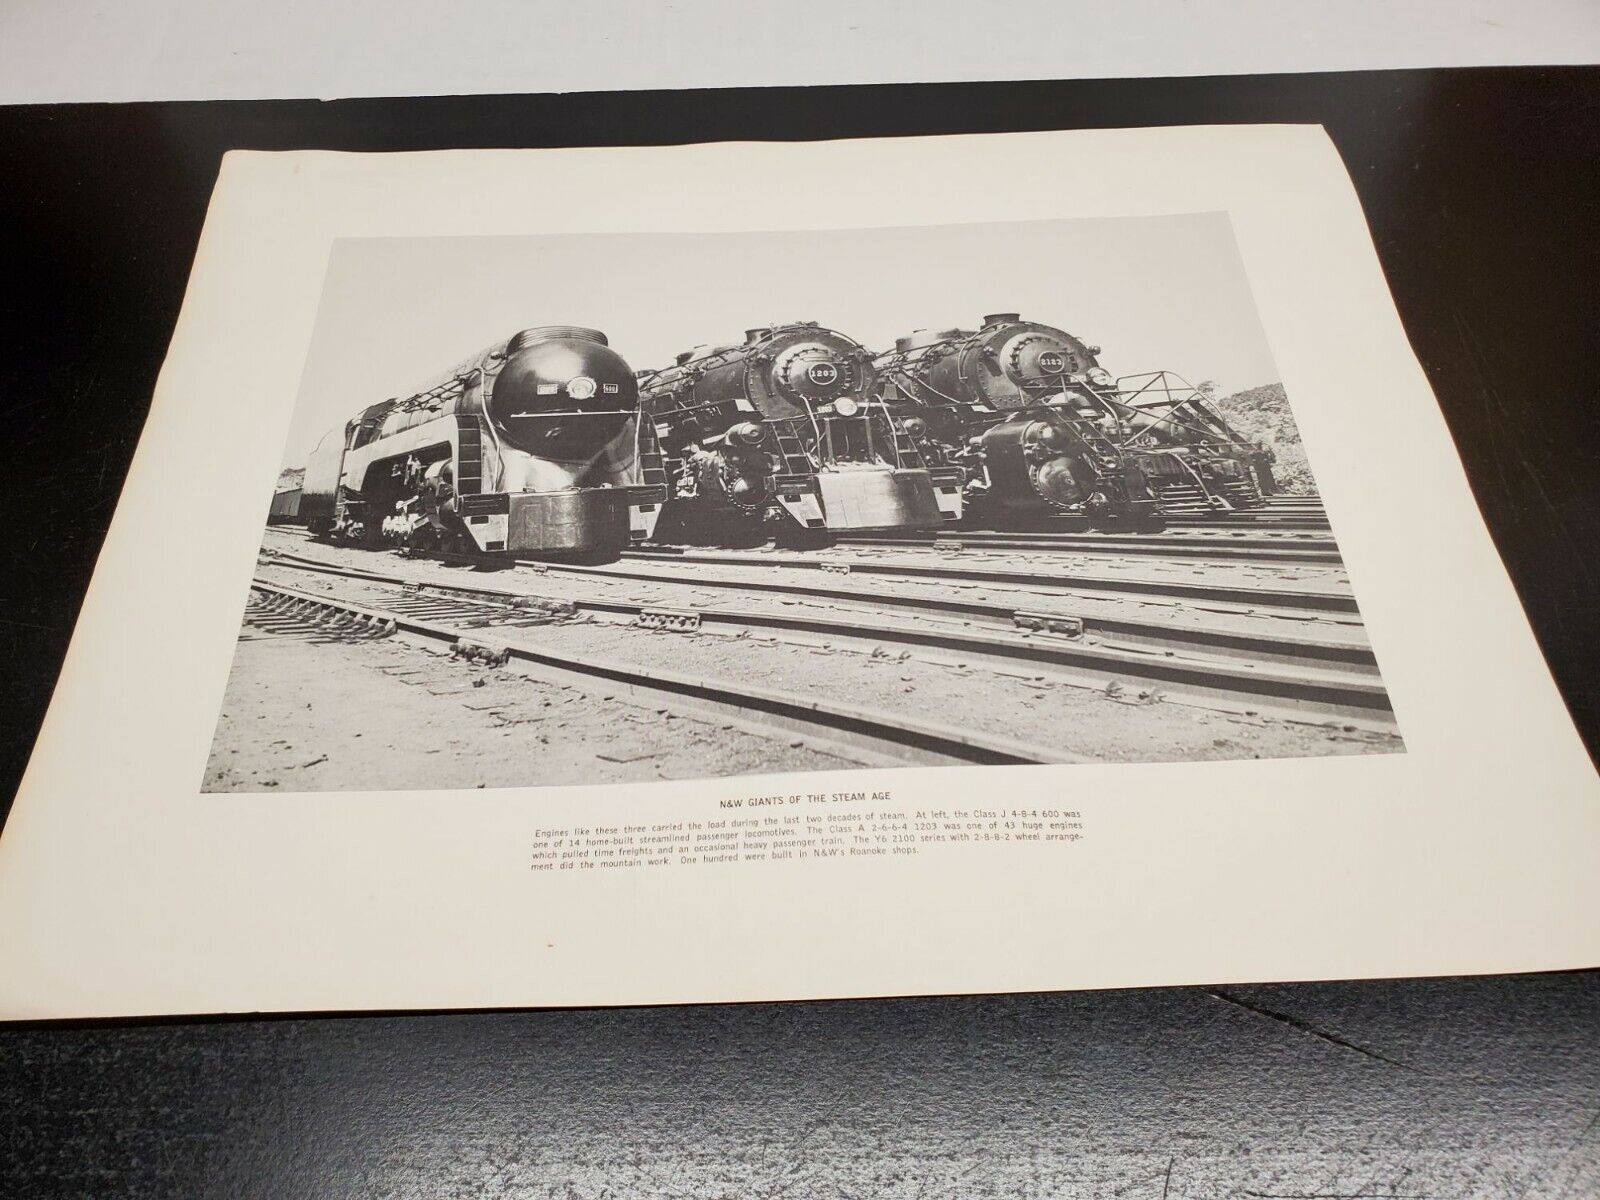 N&W Giants of the Steam Age 12 x 16 B&W Lithograph